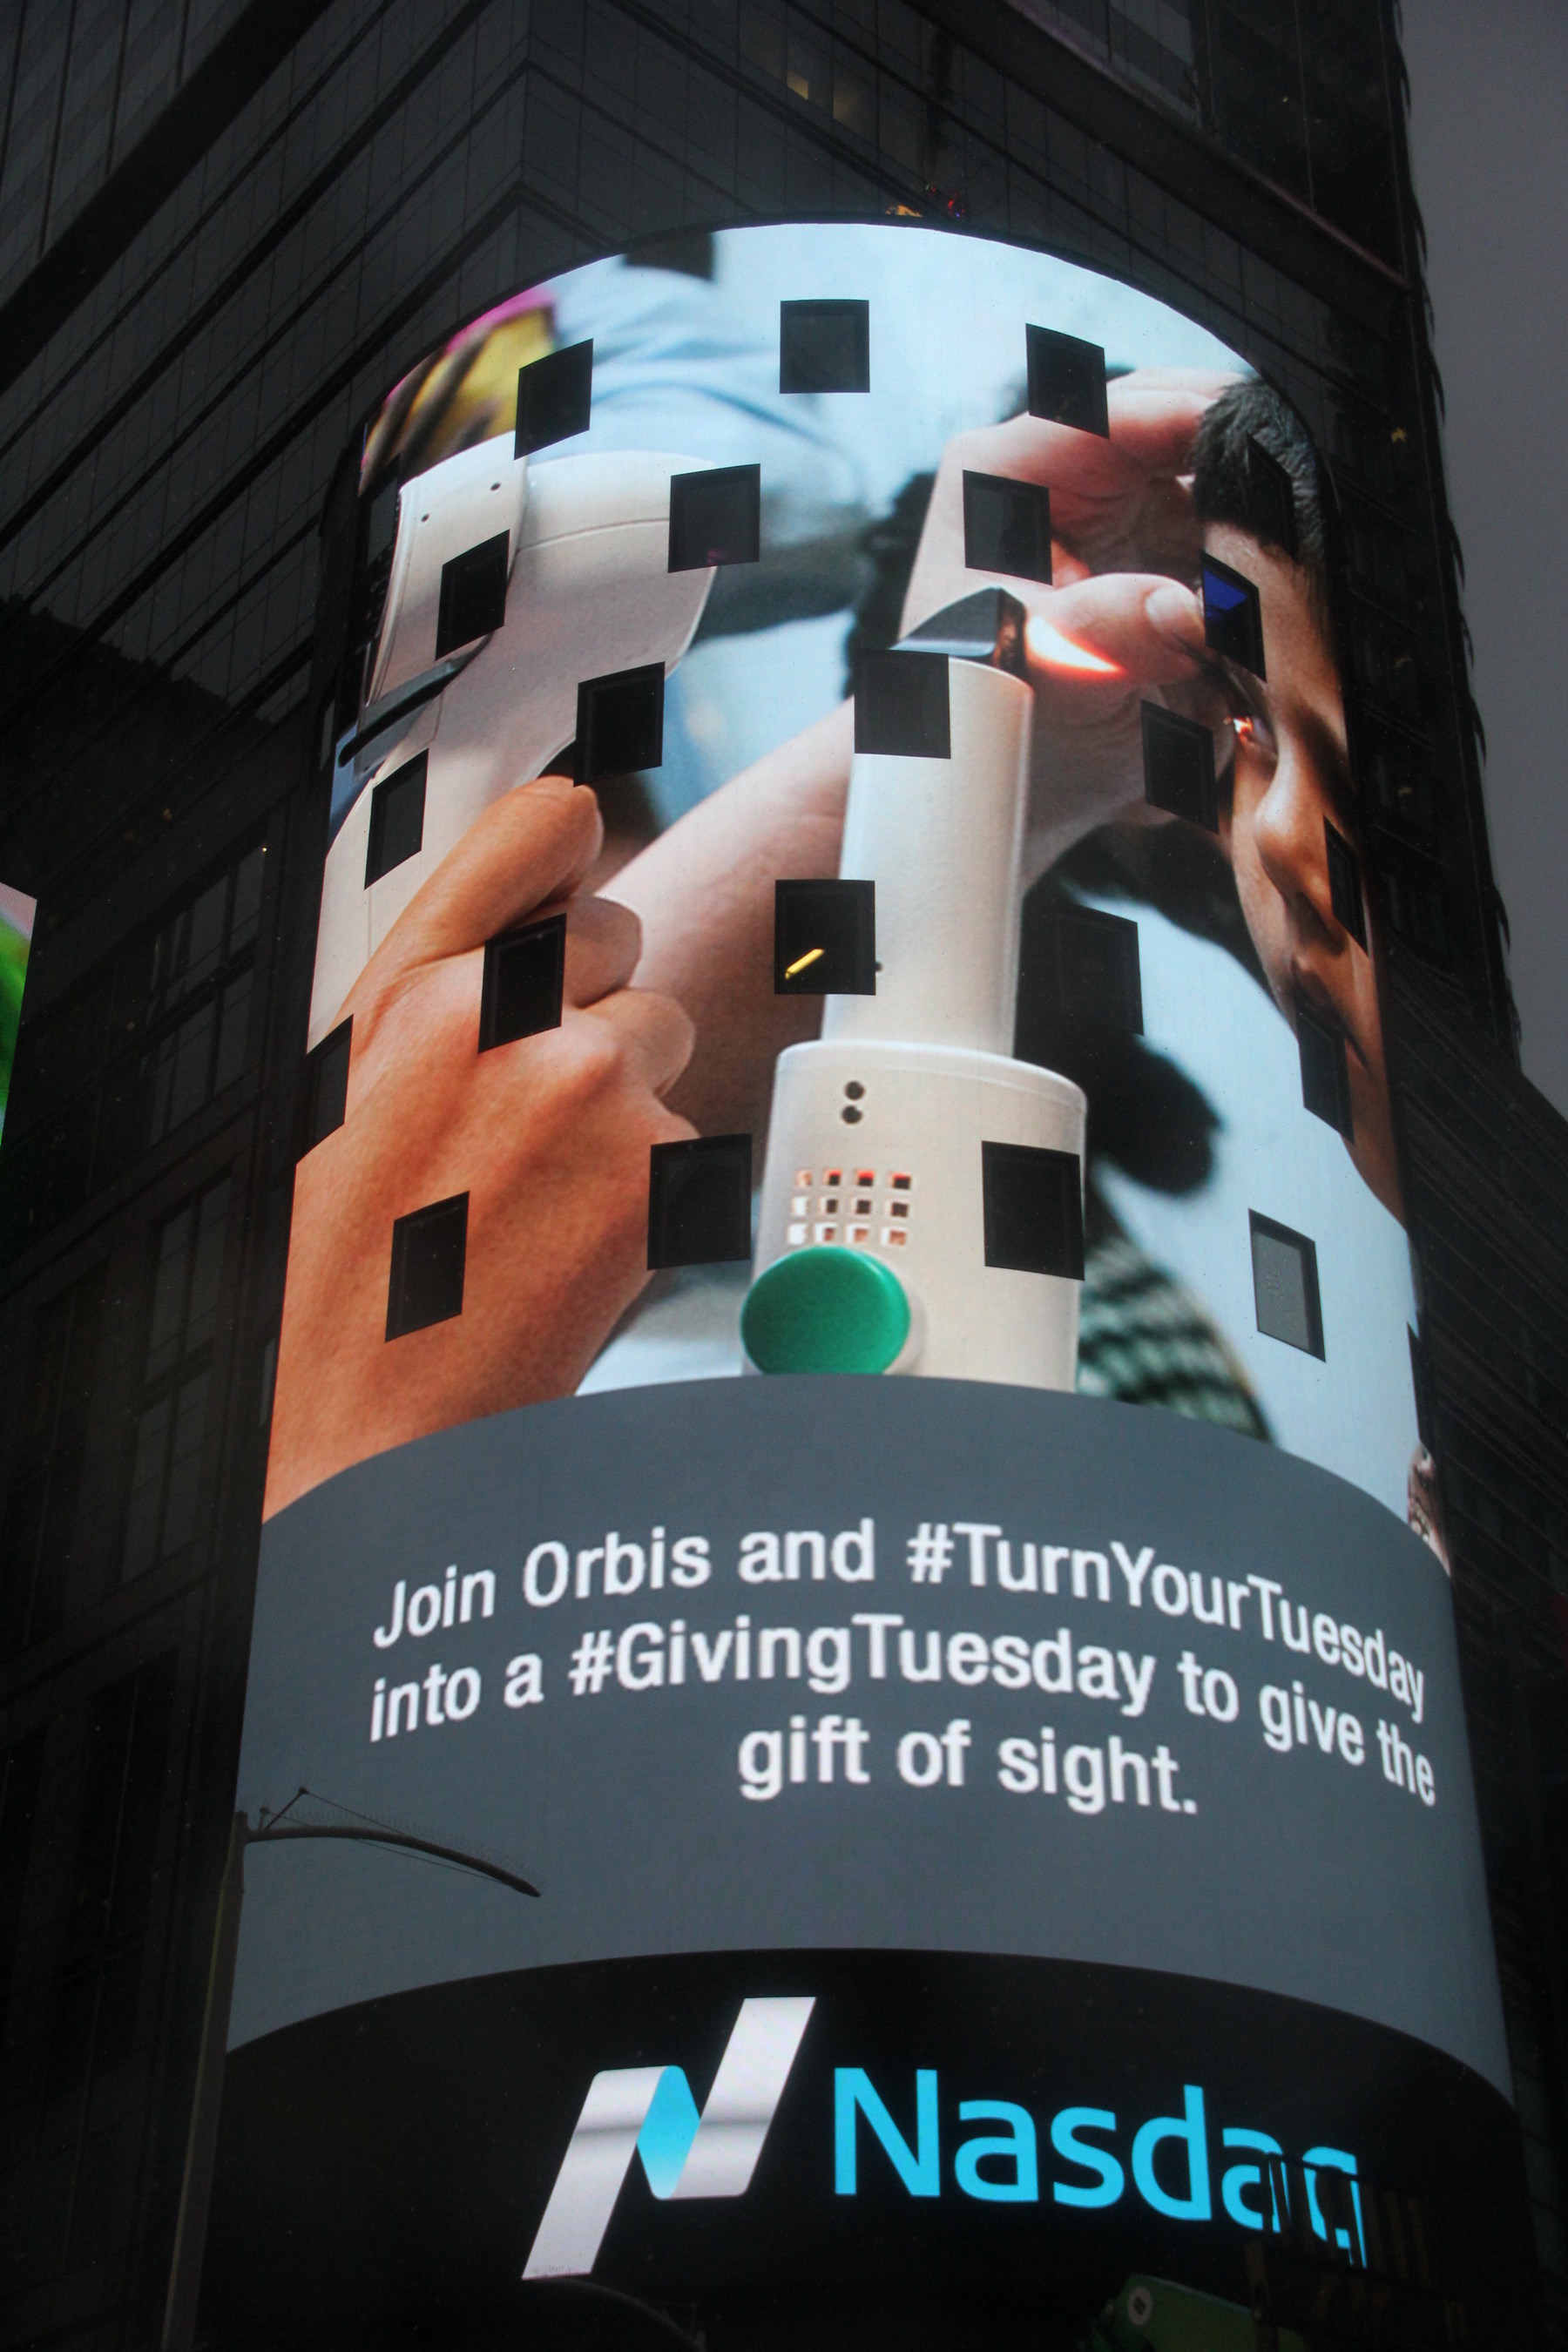 Blackbaud is takes over the Nasdaq tower at Times Square to promote what its customers are doing for #GivingTuesday. Help Orbis give the gift of sight this #GivingTuesday